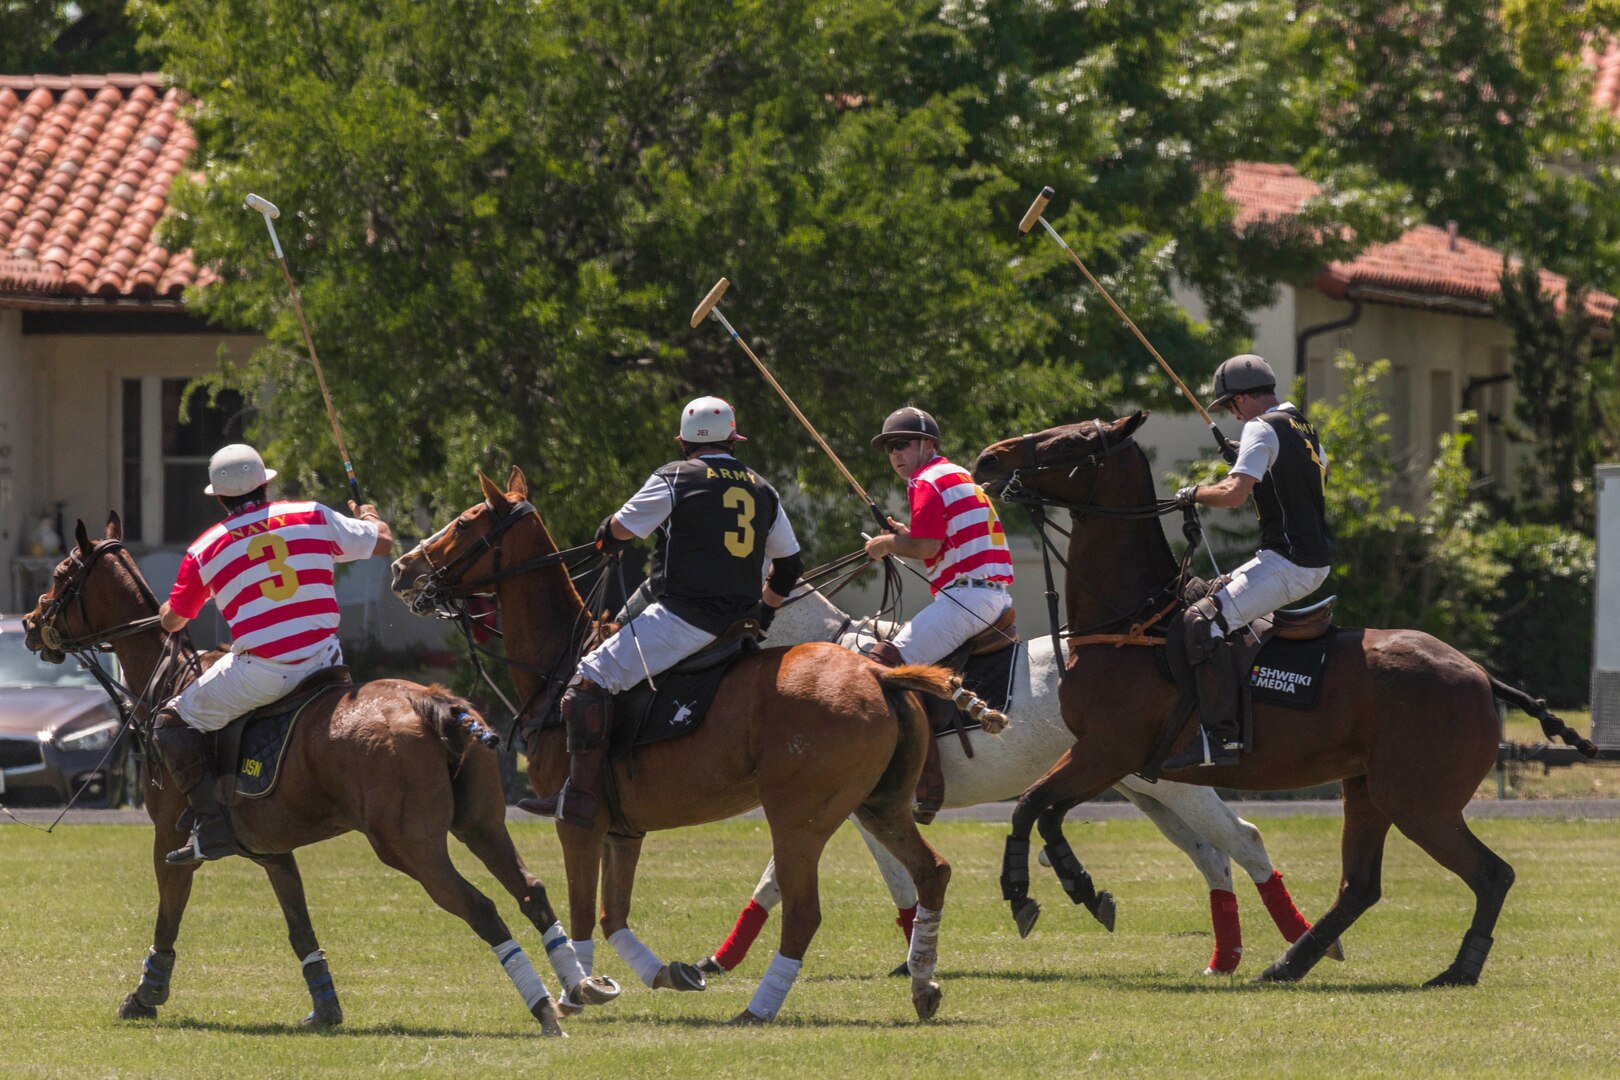 U.S. Army and Navy polo teams compete against one another during the annual Military Appreciation Weekend May 6, 2017 at Joint Base San Antonio-Fort Sam Houston, Texas. U.S. Army North and JBSA hosted the two-day event, which featured music, family activities, and various military demonstrations. This year, the appreciation weekend also commemorated the 300th anniversary for the city of San Antonio. (U.S. Air Force photo by Ismael Ortega / Released)